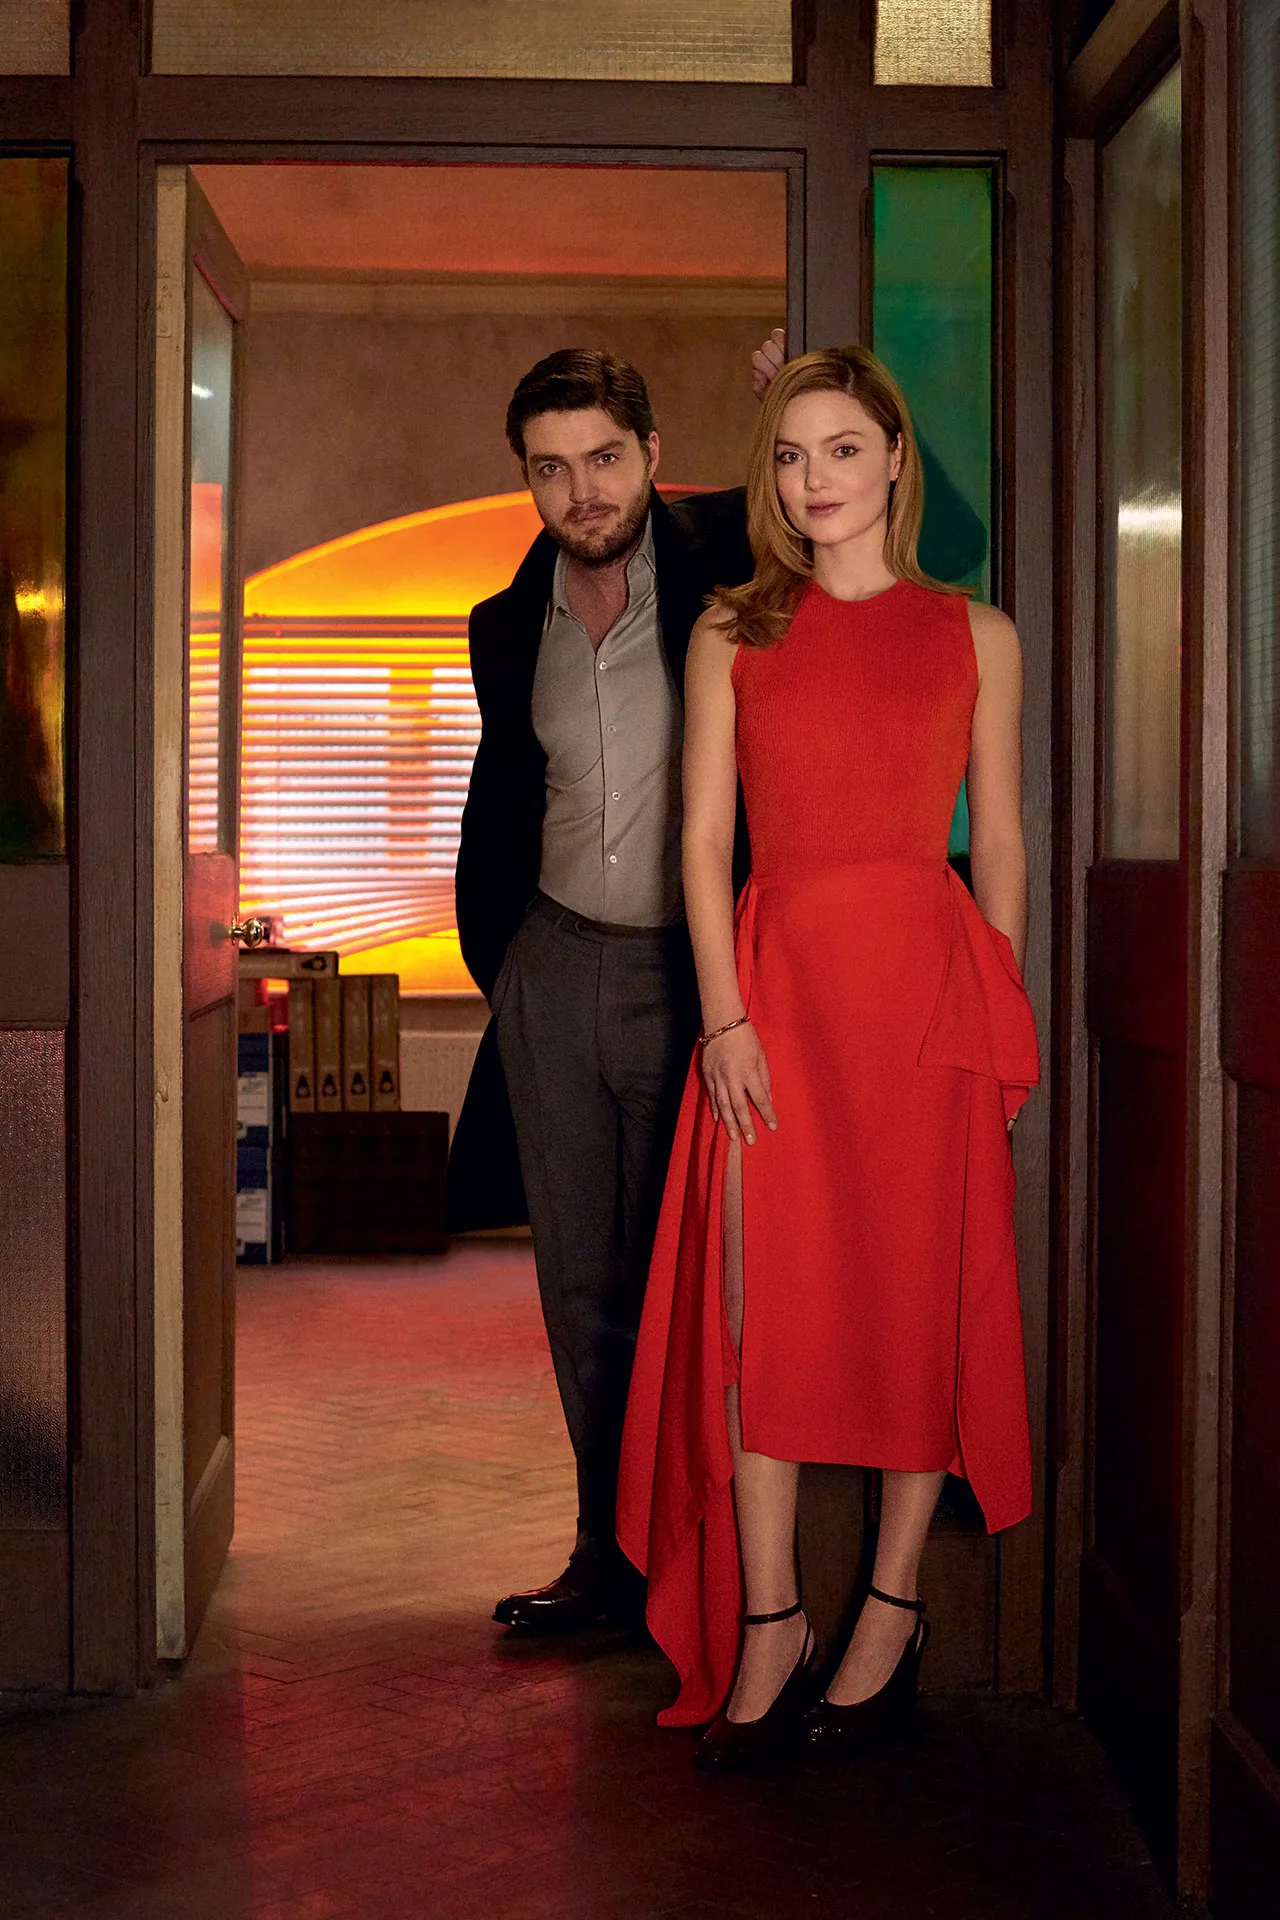 Tom Burke and Holliday Grainger worked together on the TV series 'Strike'